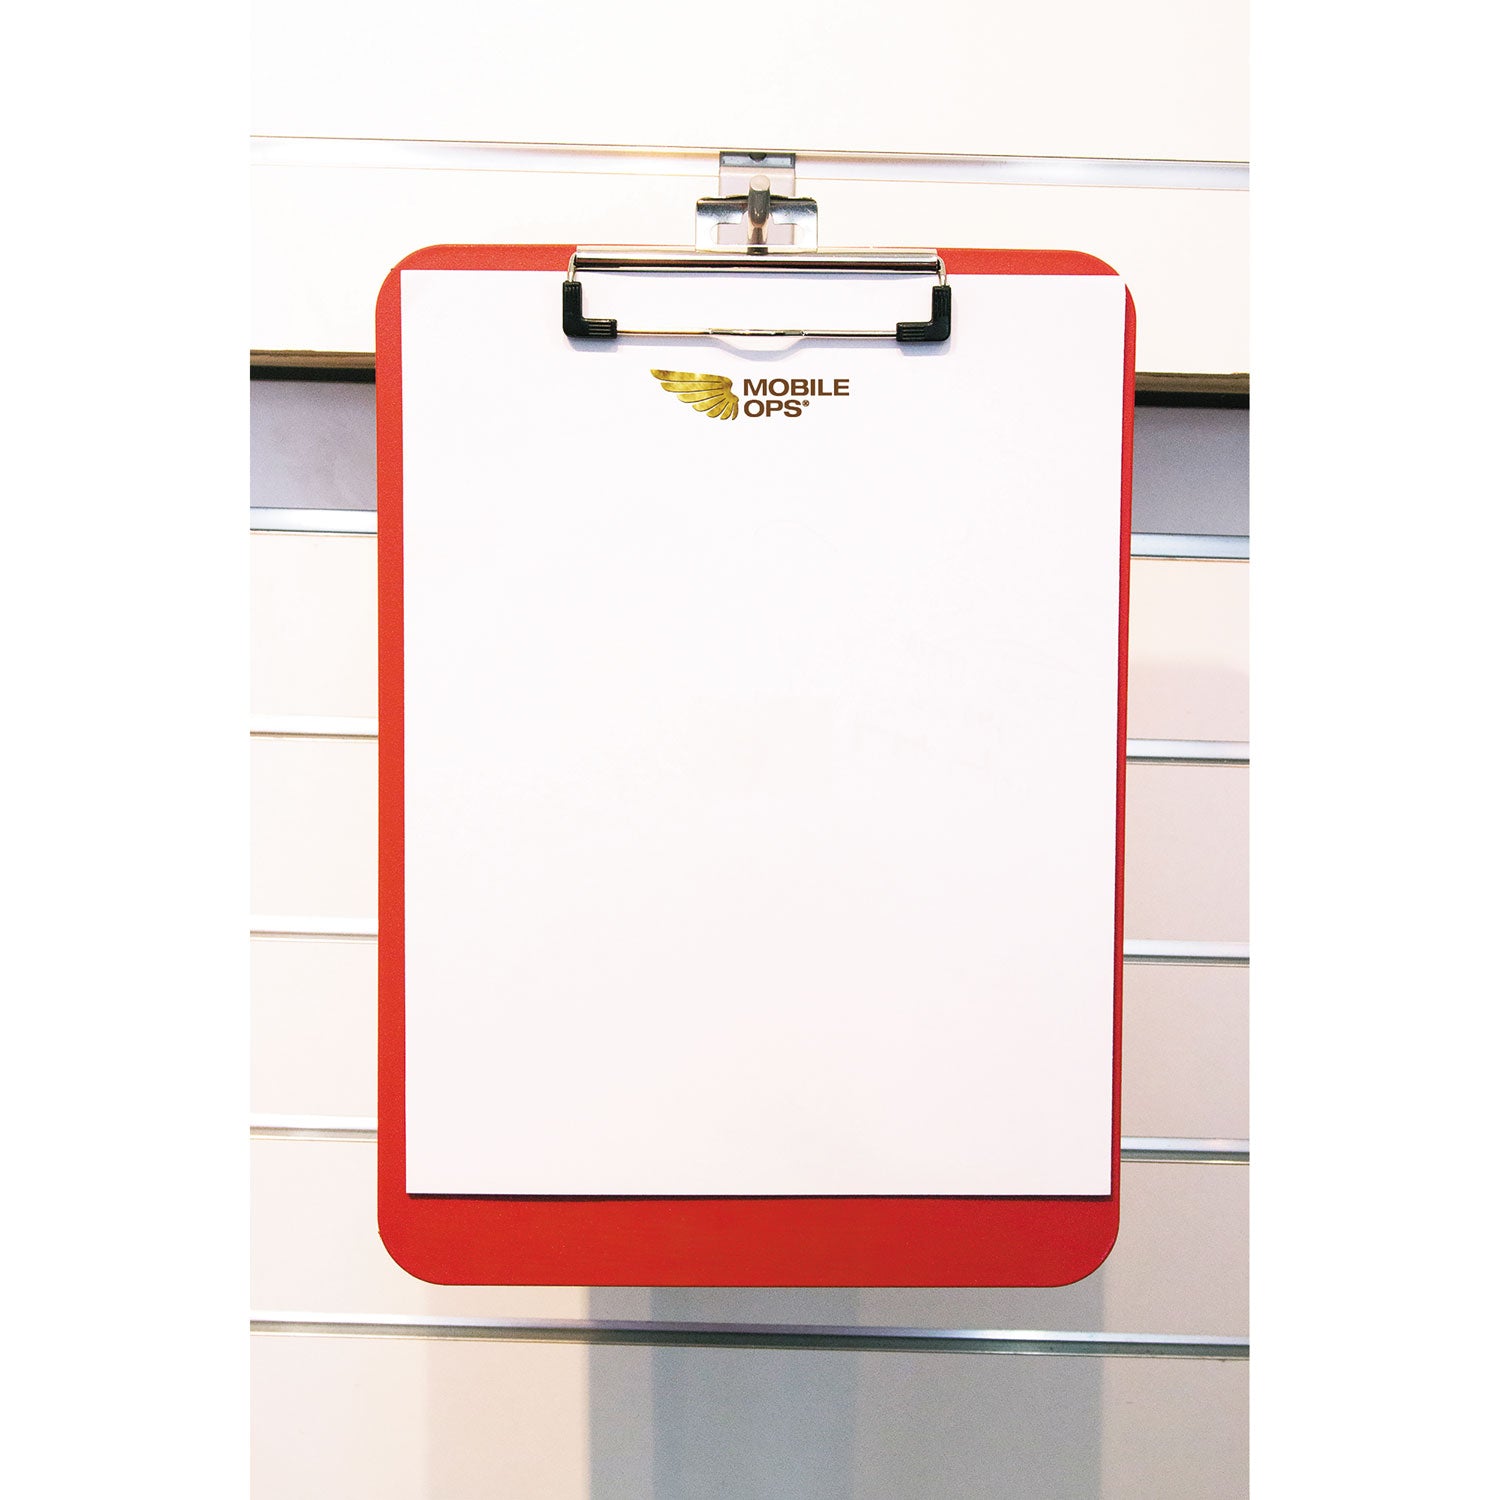 Unbreakable Recycled Clipboard, 0.25" Clip Capacity, Holds 8.5 x 11 Sheets, Red - 